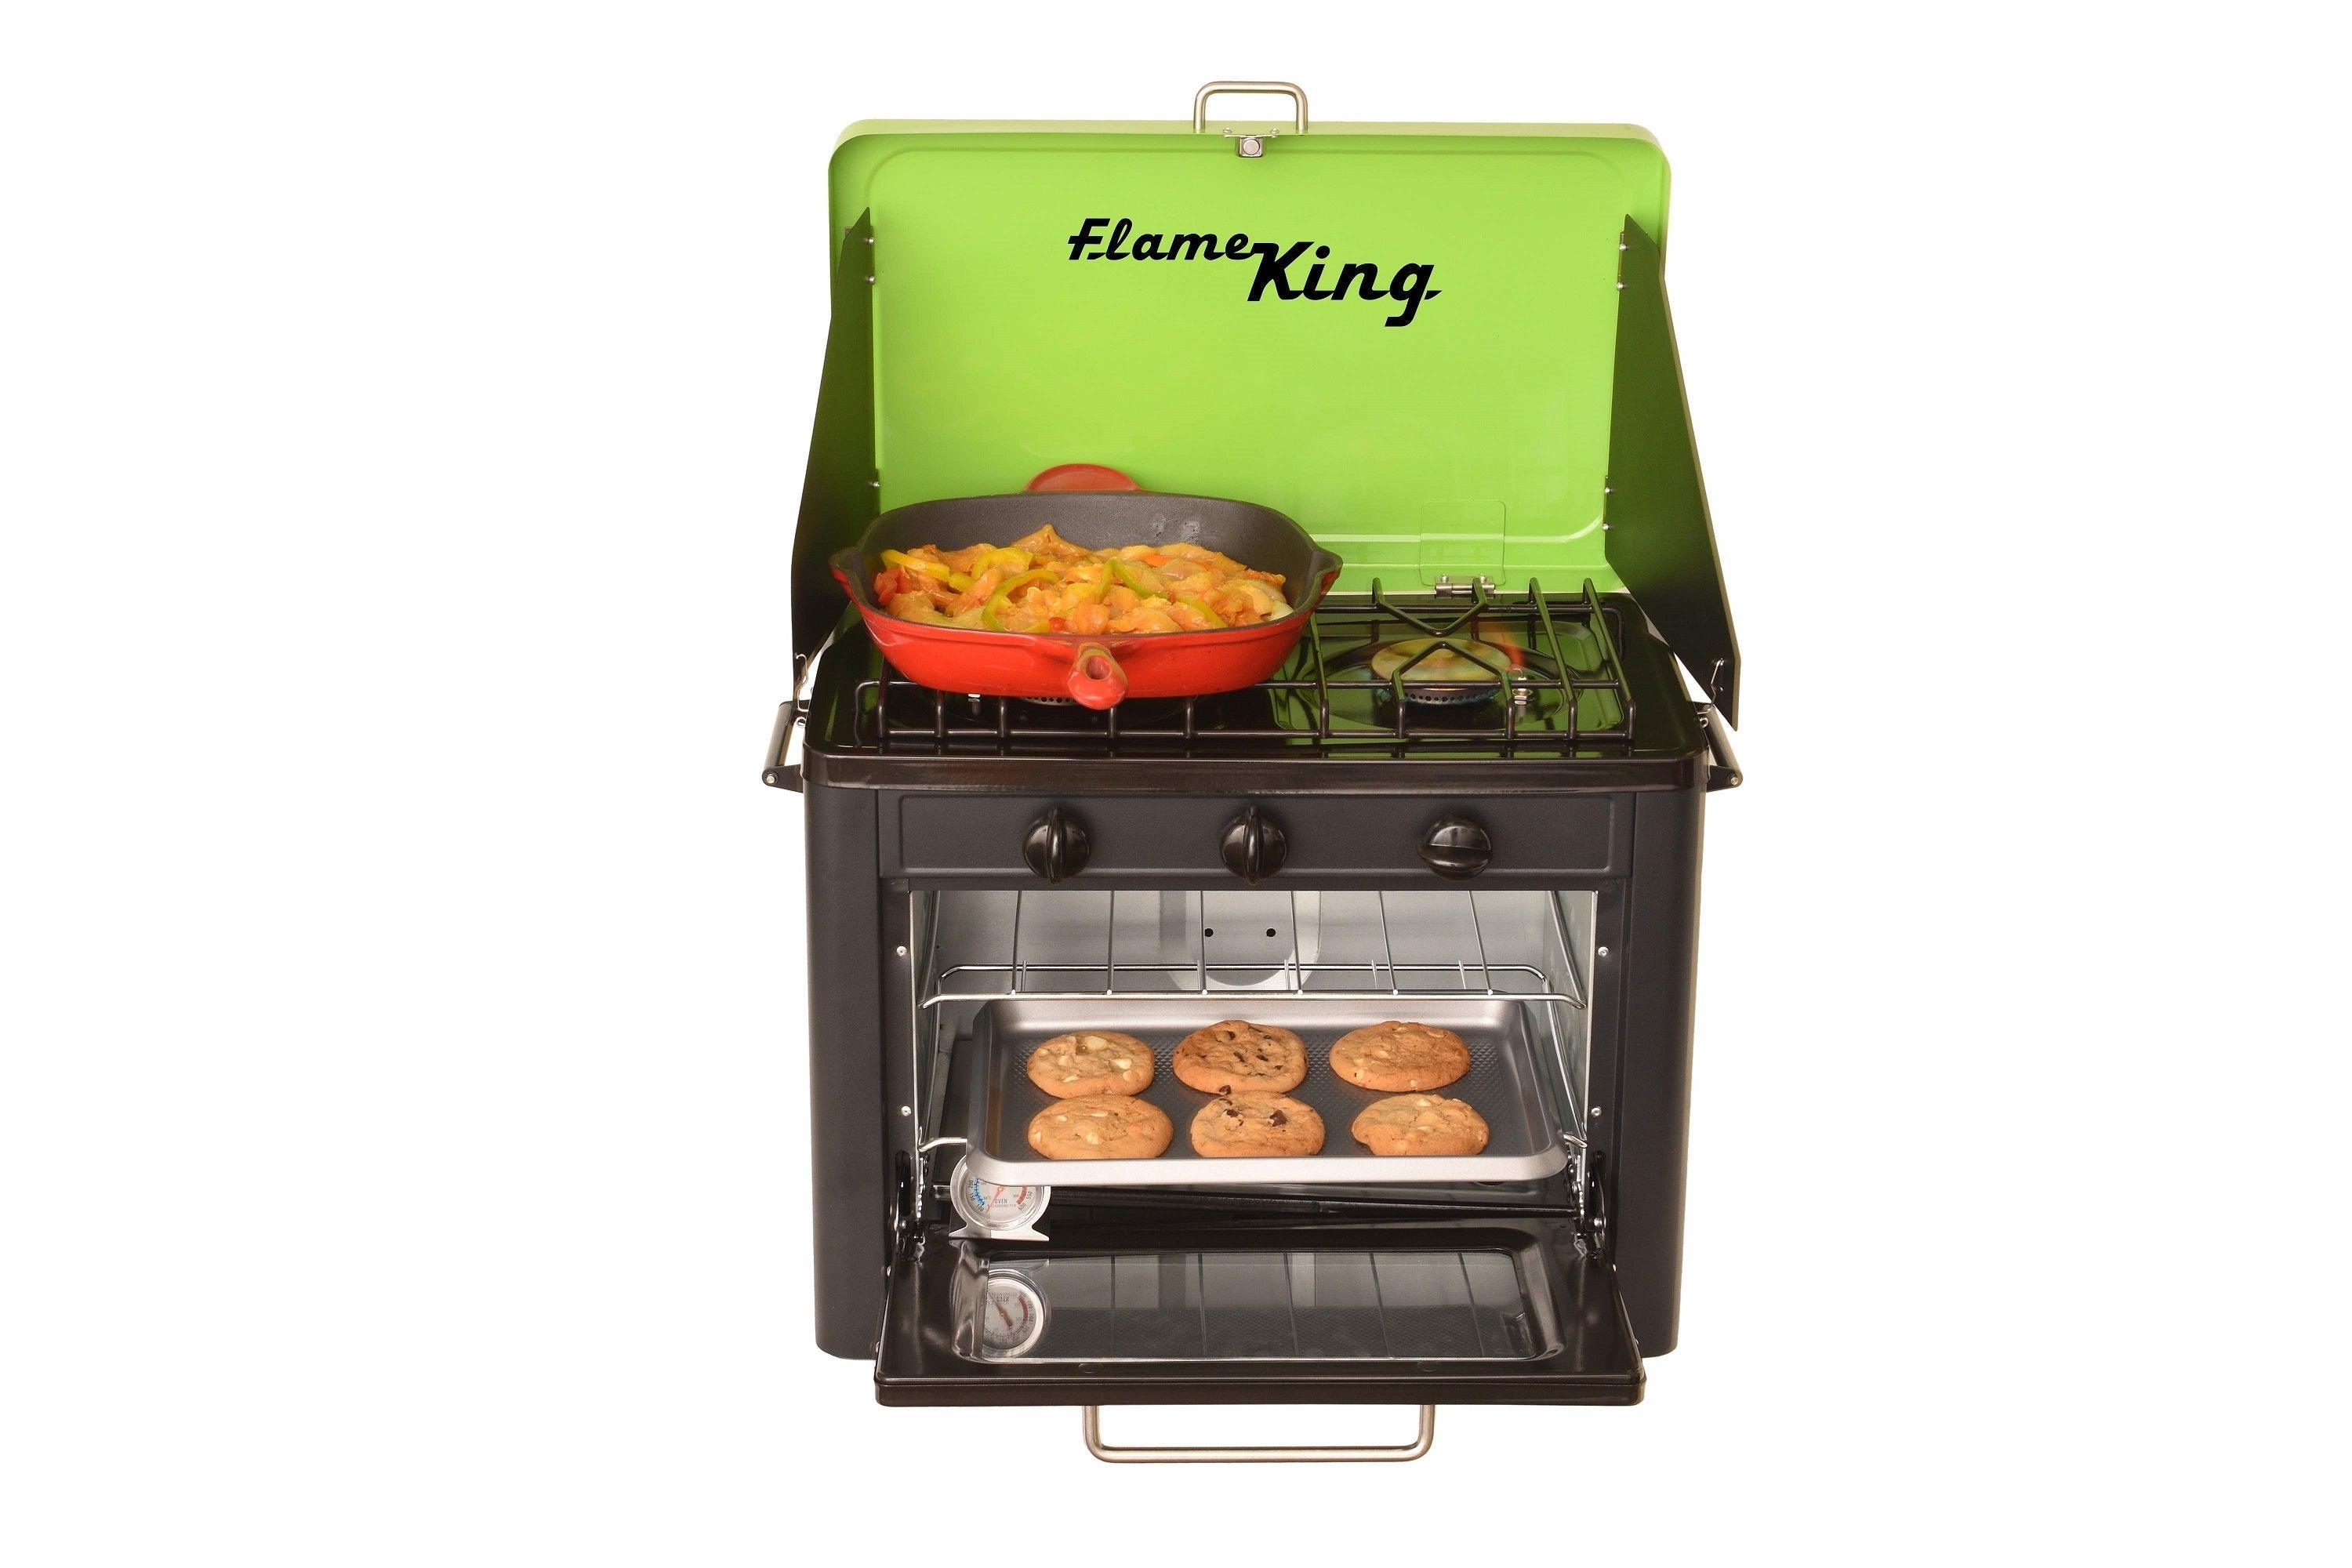 Flame King Portable Outdoor Propane Oven/Stove Combo for Camping